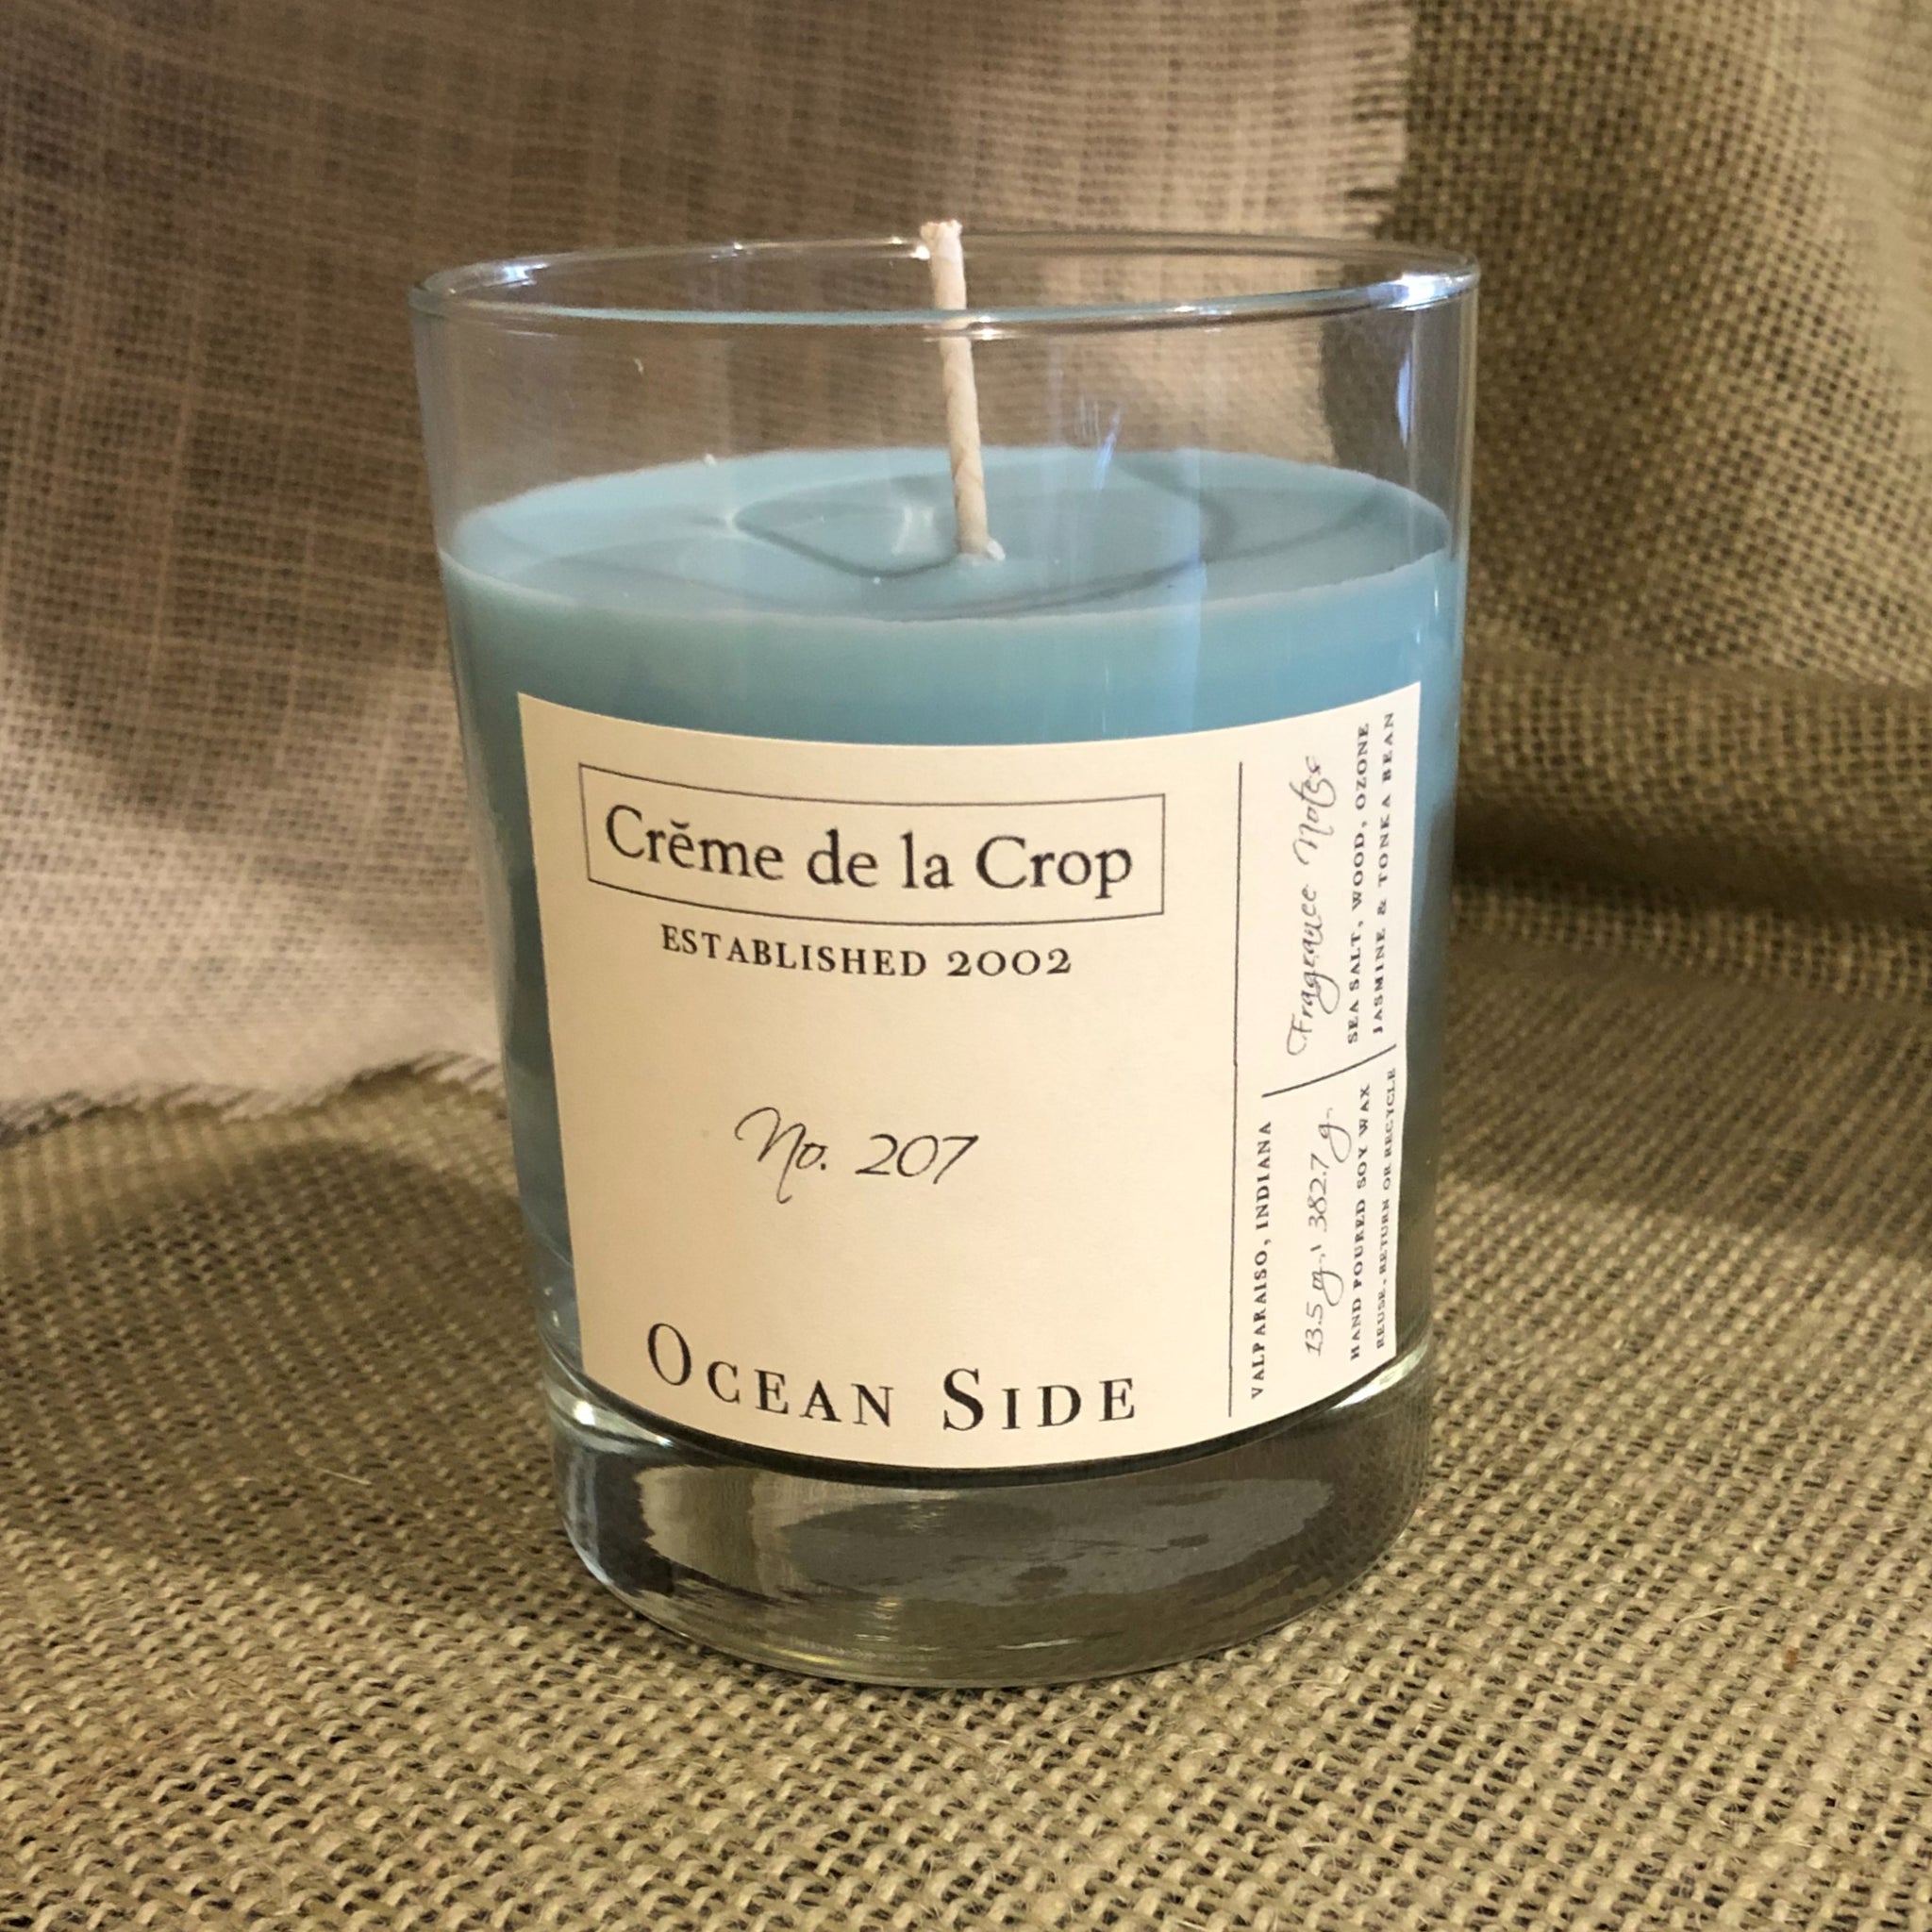 Soy Candle - Ocean Side 100% Soy Wax, Hand-Poured Candle - 13.5oz Fragrance Note:Green leaves, Jasmine, Lily of the Valley, Orange, Ozone Sea Salt, and Wood Tonka Bean front